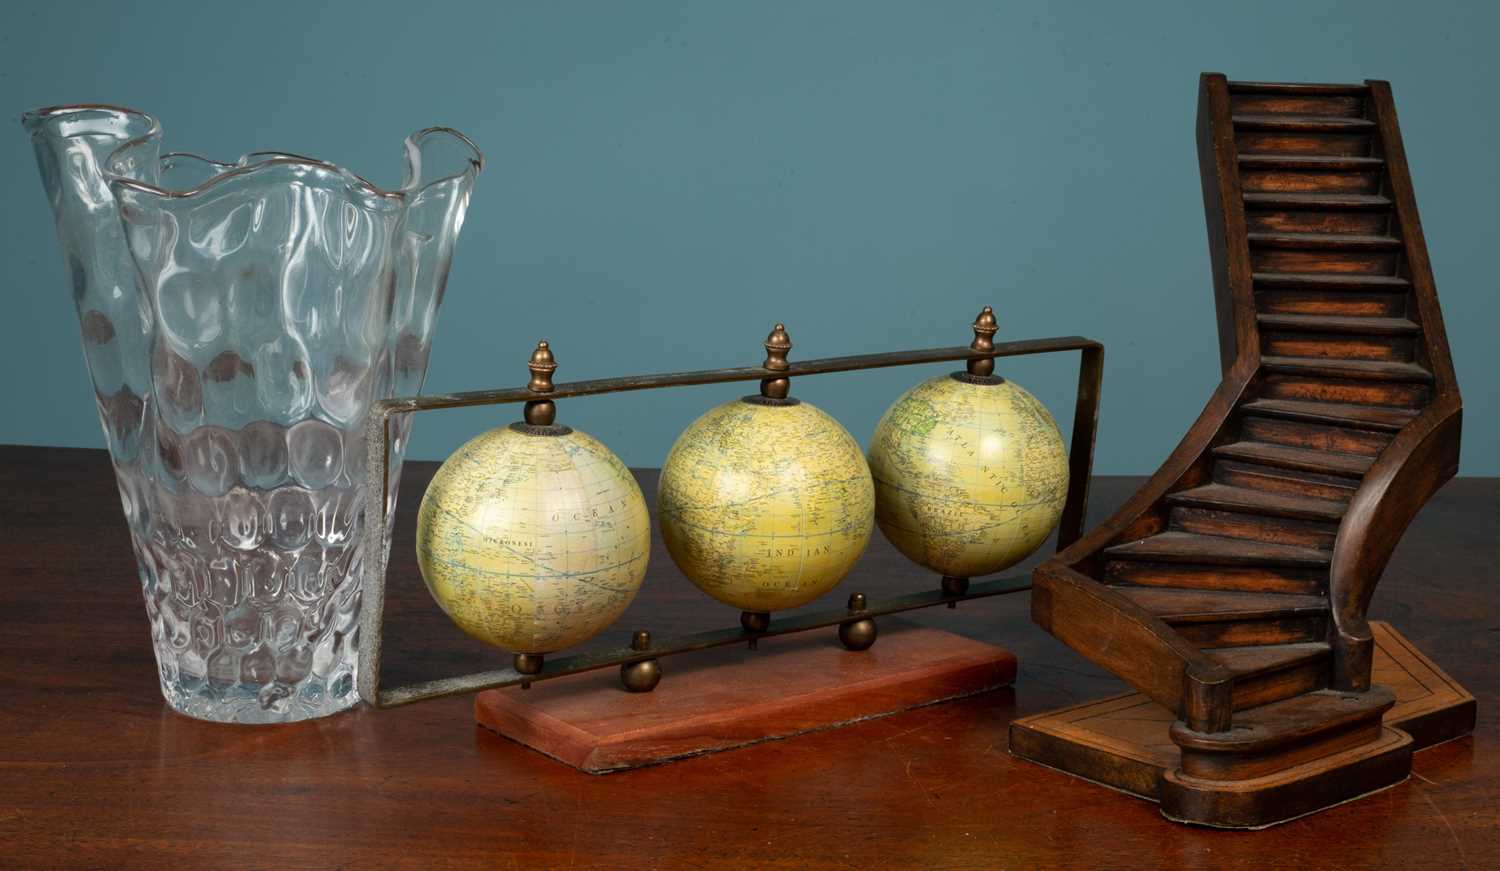 Lot 25 - A hardwood staircase model; a set of three globes; and a glass vase